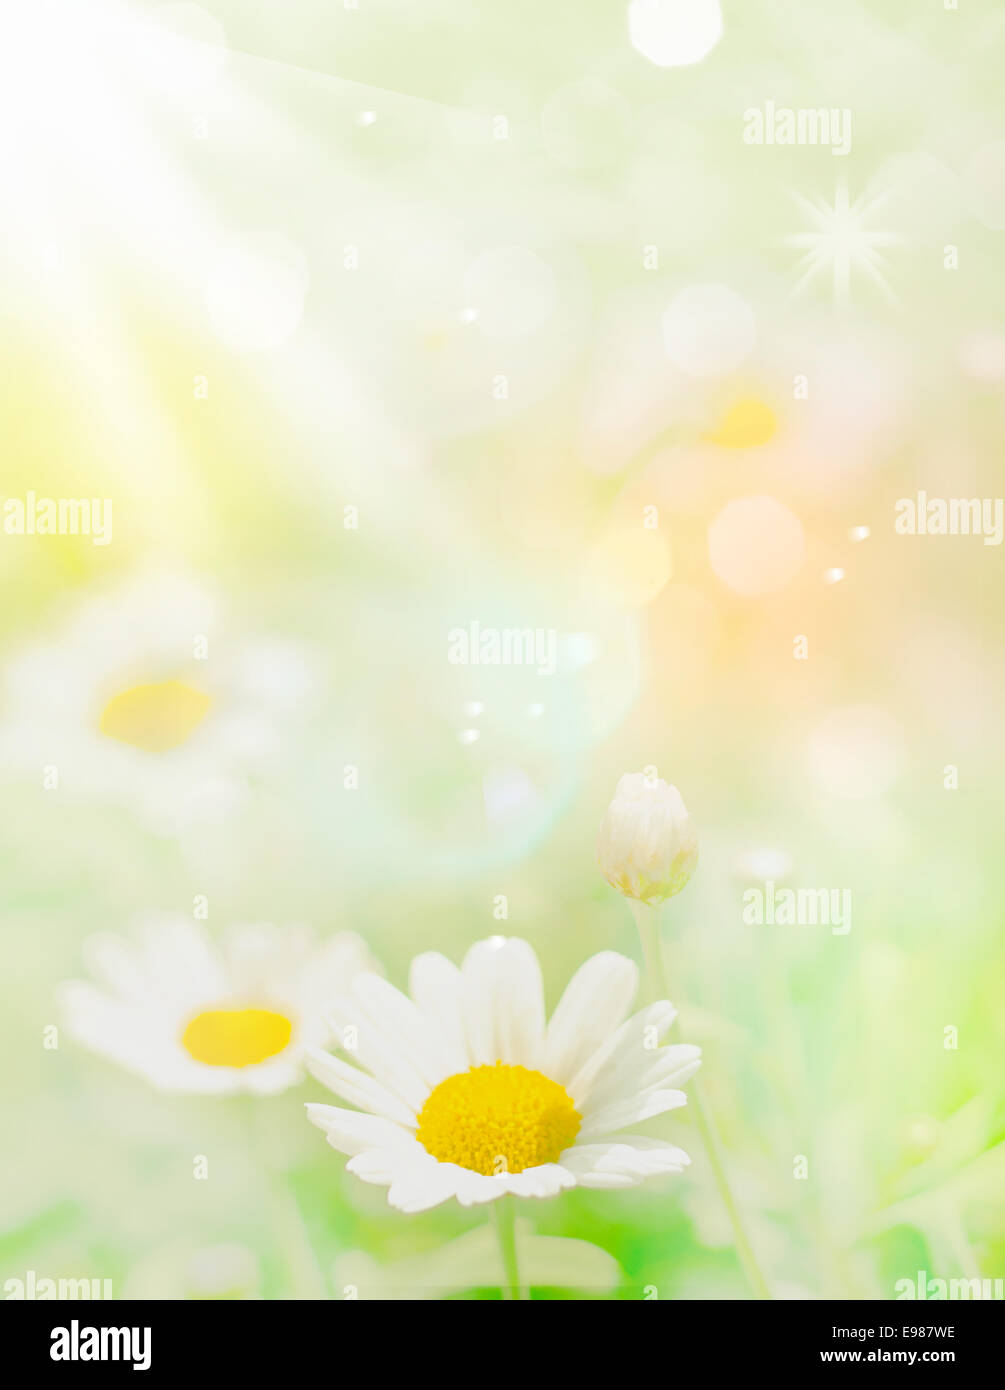 Blurry Flowers with pastel colors and defocused elements for floral concepts Stock Photo